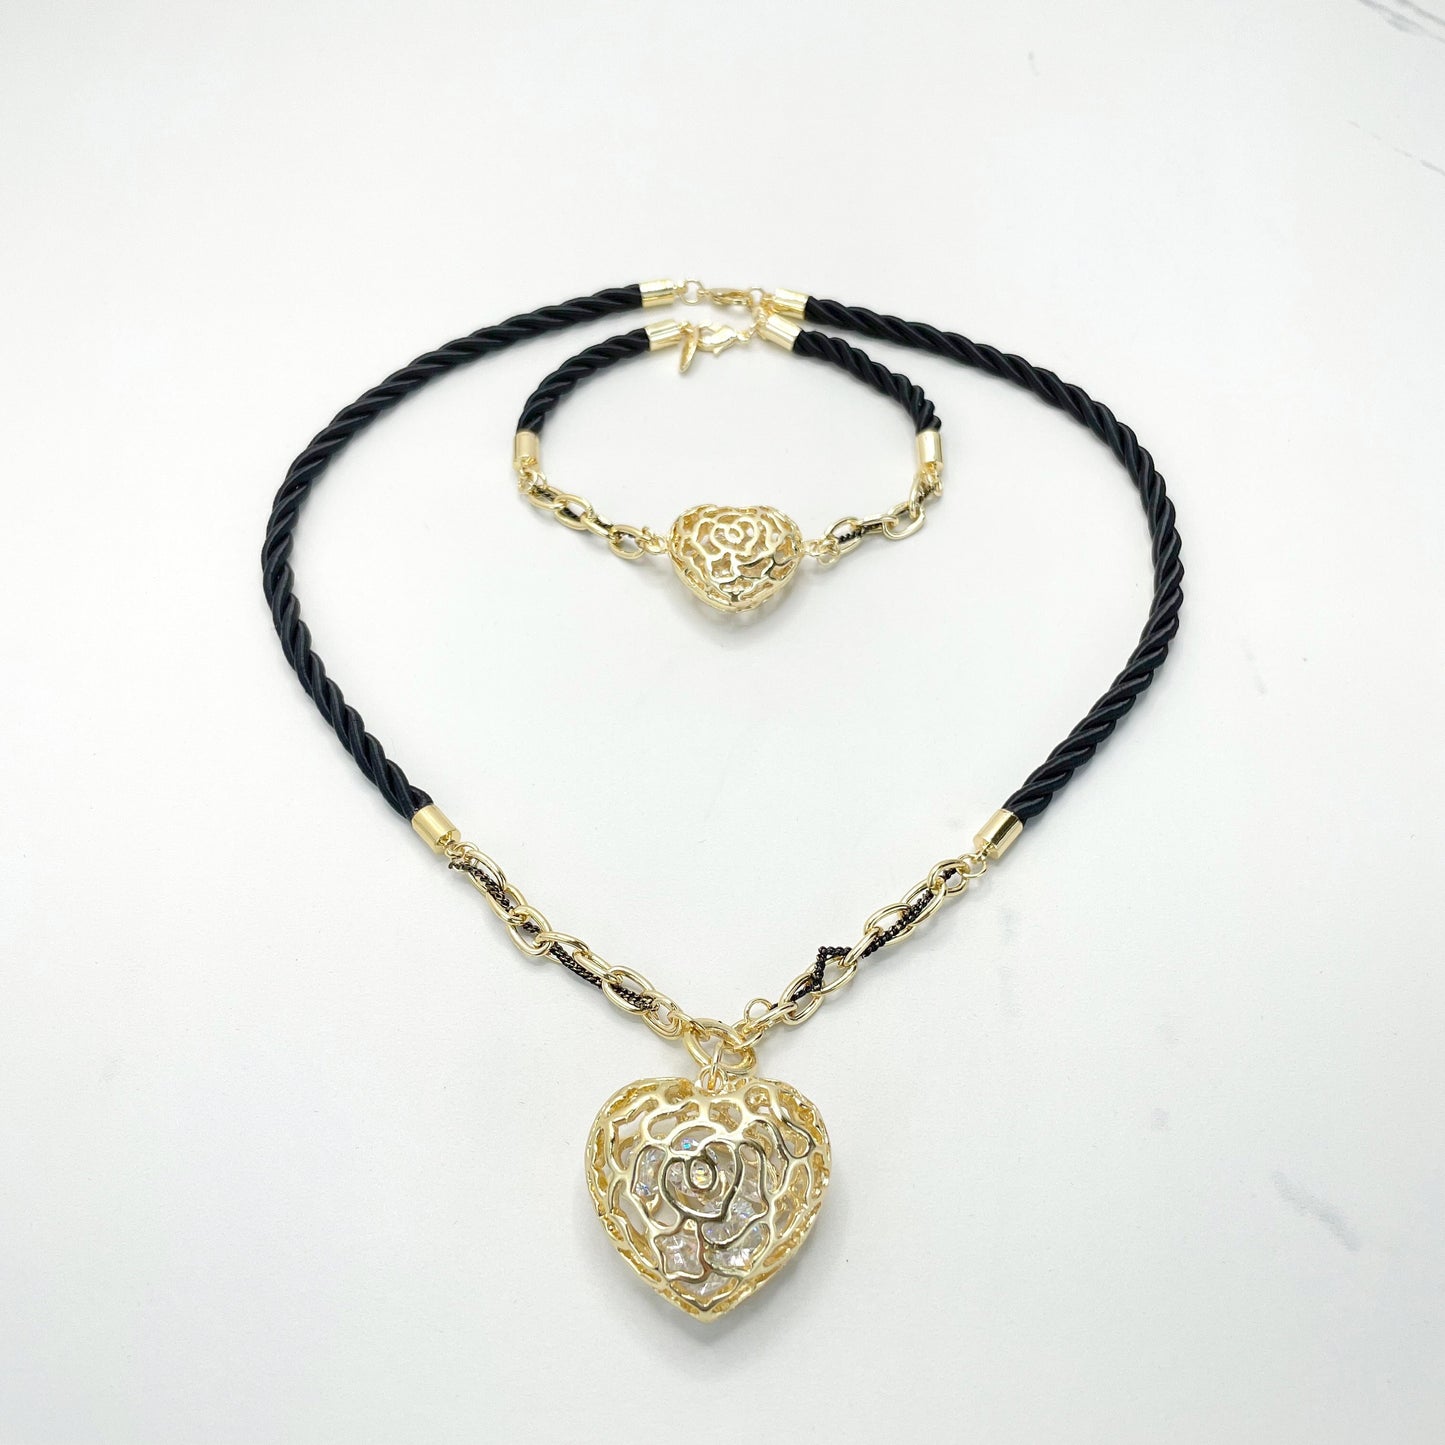 18k Gold Filled Black Satin Rope Set, Large Puffy Heart with Rattle Stones inside, 04 Pieces, Wholesale Jewelry Making Supplies